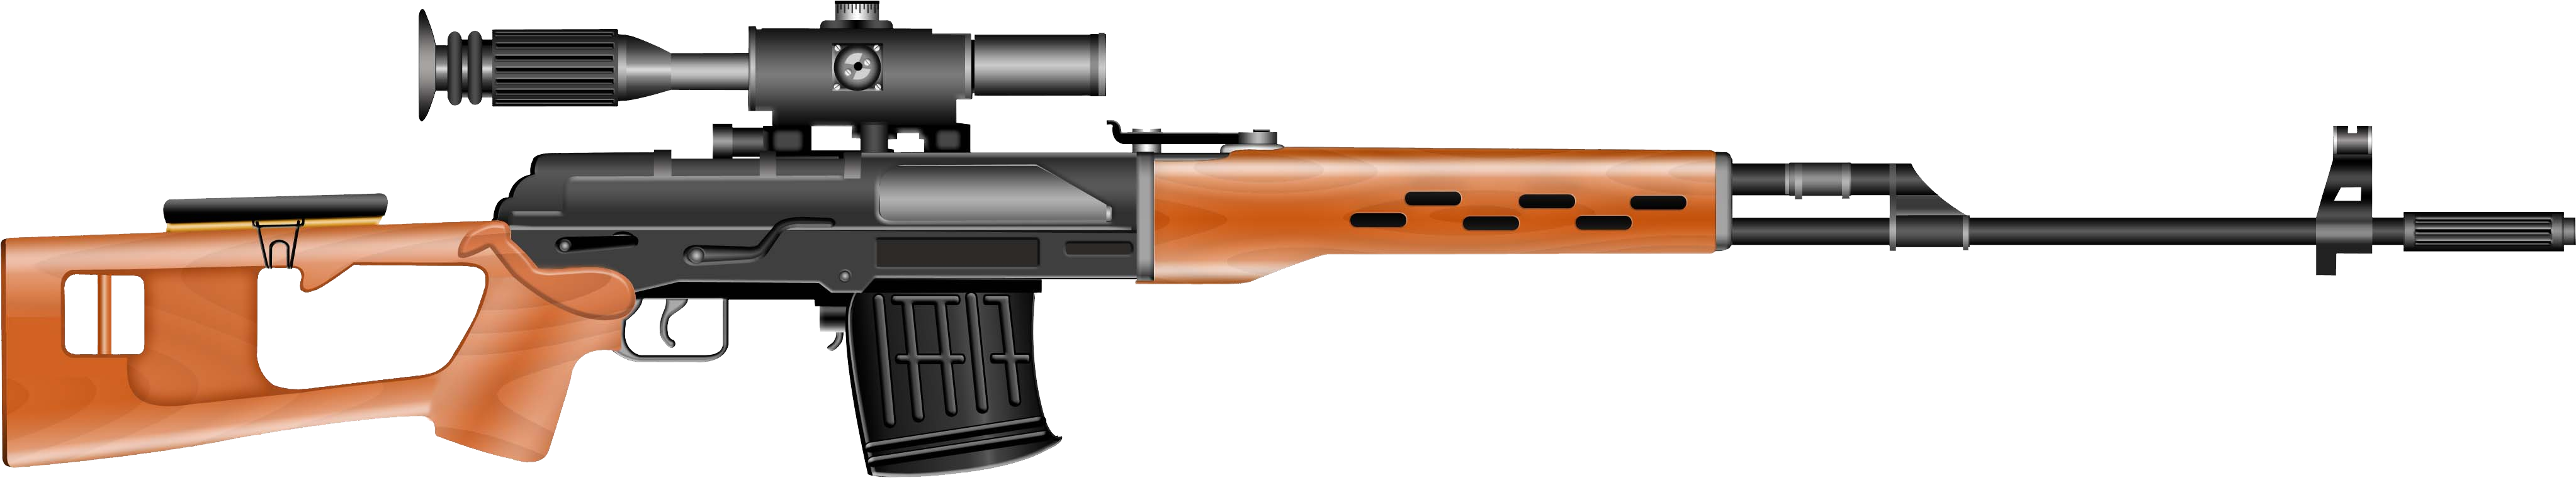 Weapon Clipart PNG Image